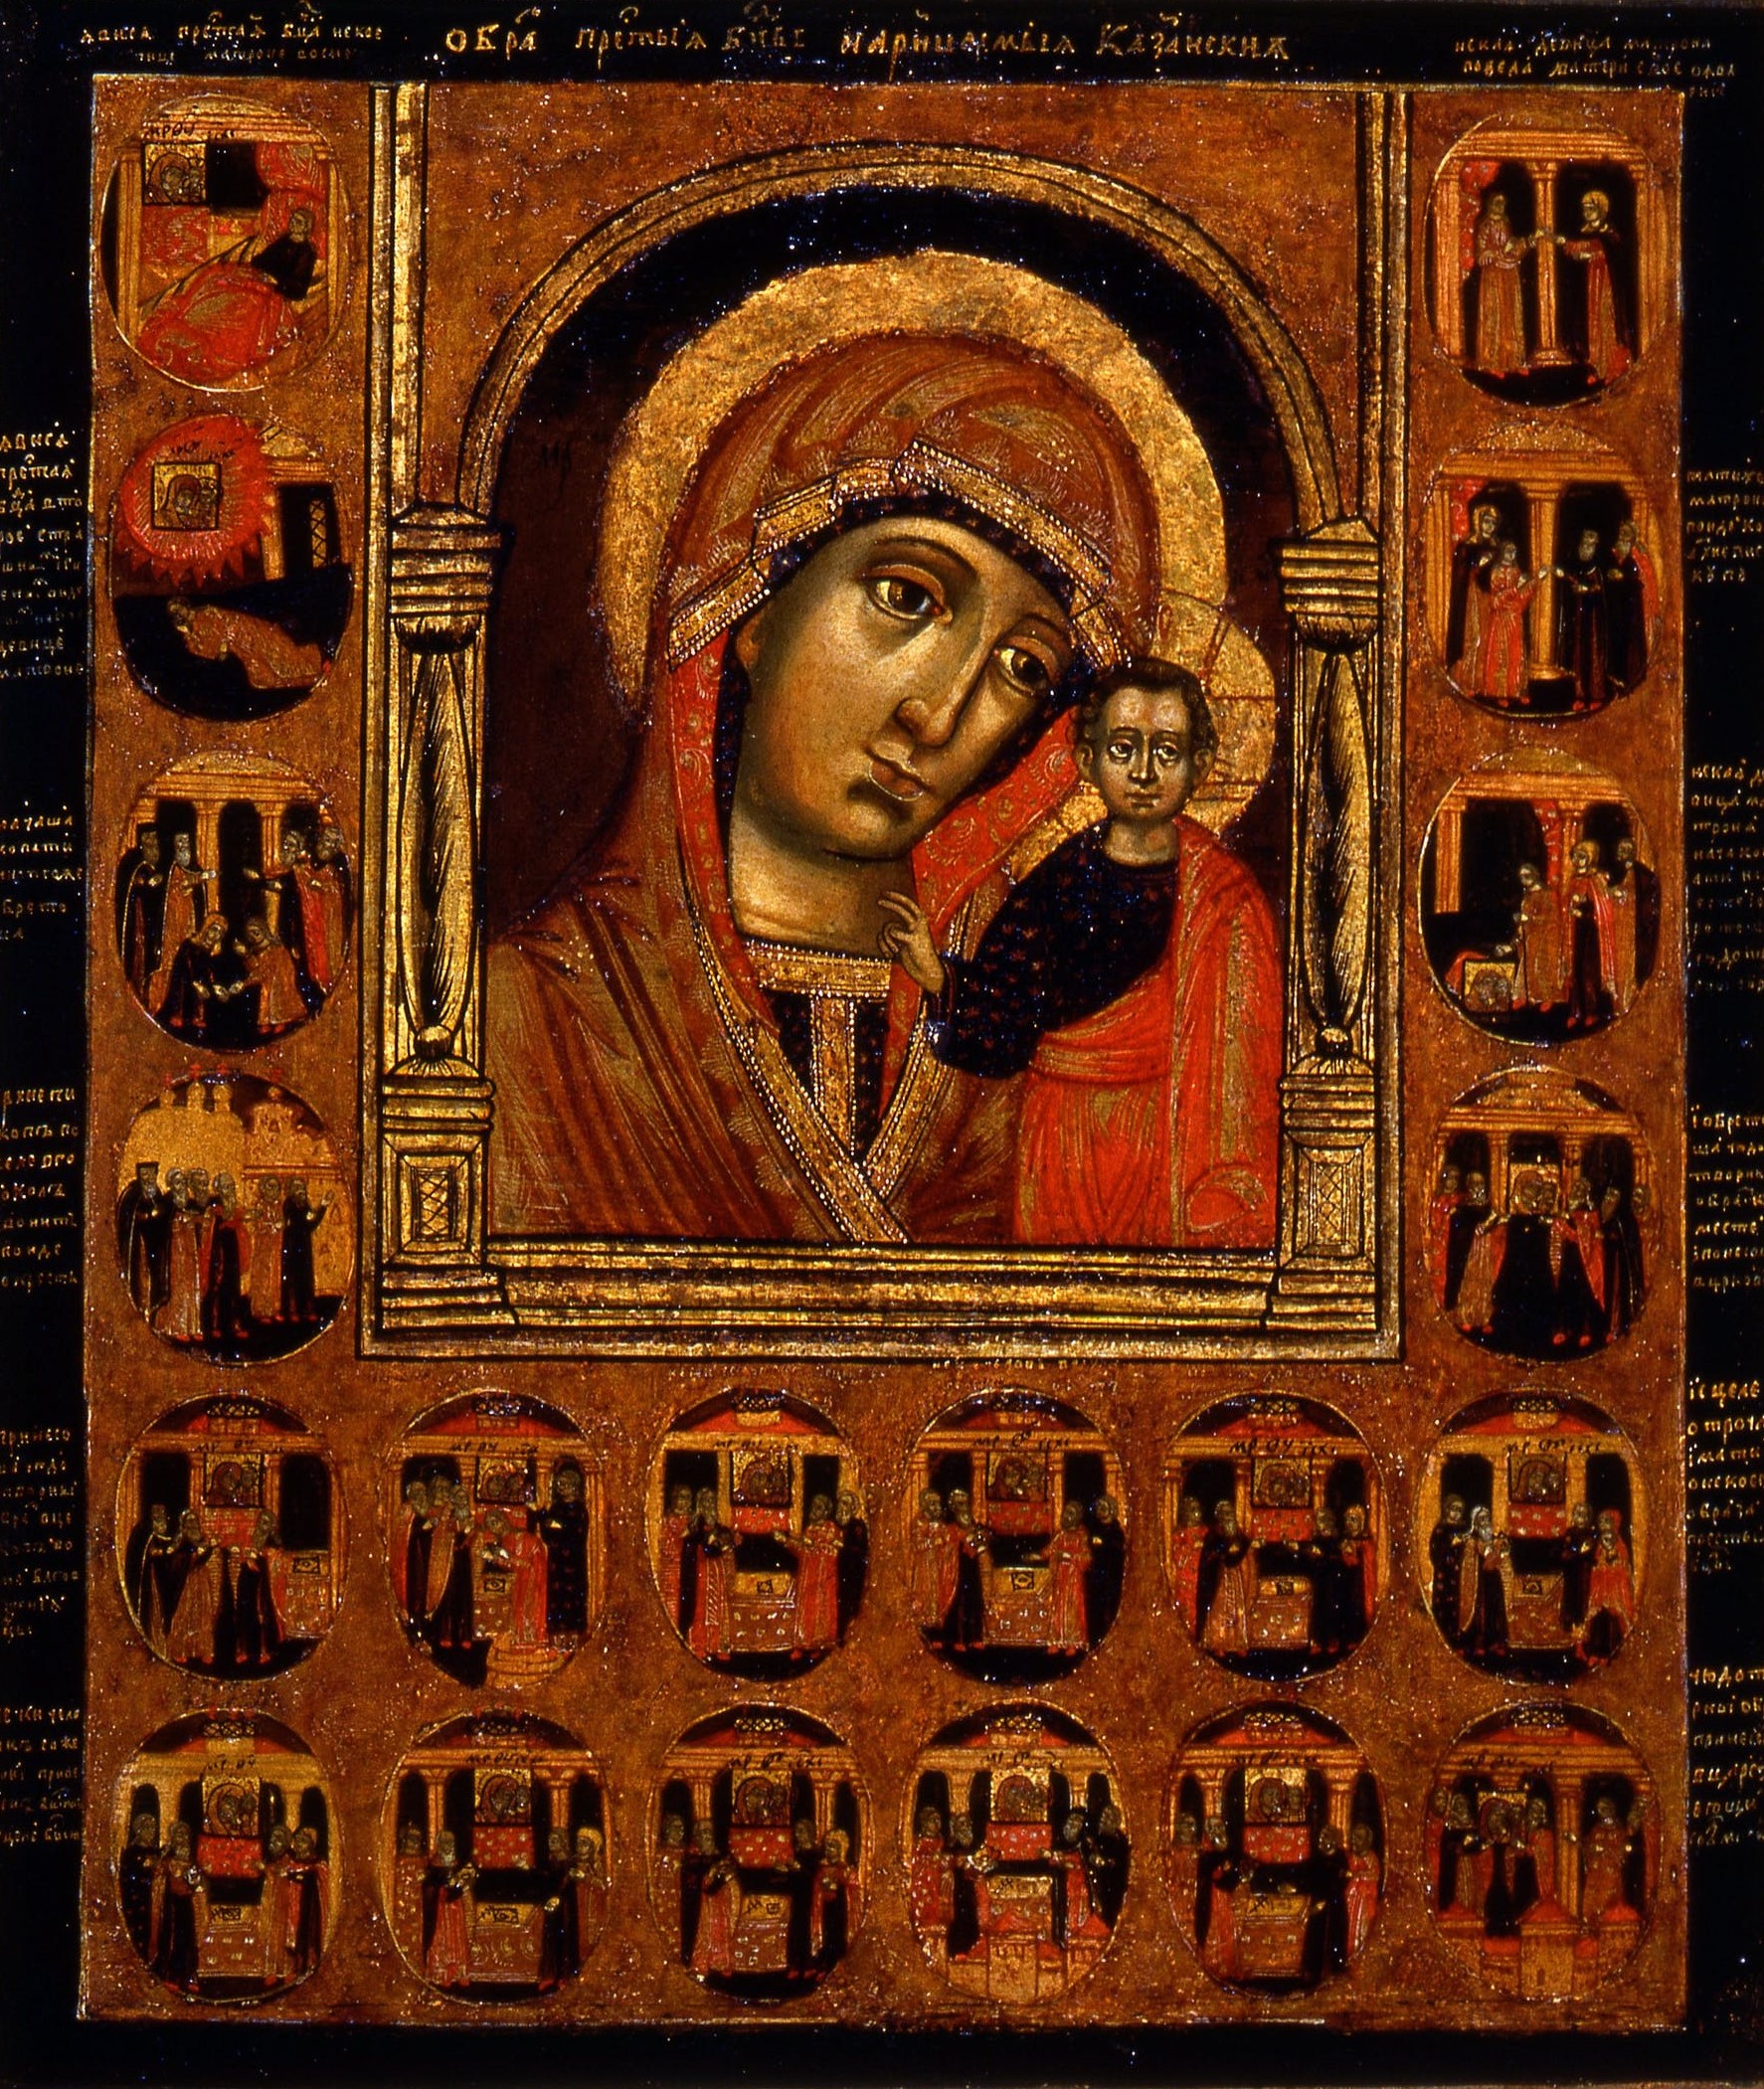 The Russian Icons Collection at the Uffizi. The 14th edition of the “I mai visti” exhibition series. Masterpieces from the Uffizi storage.